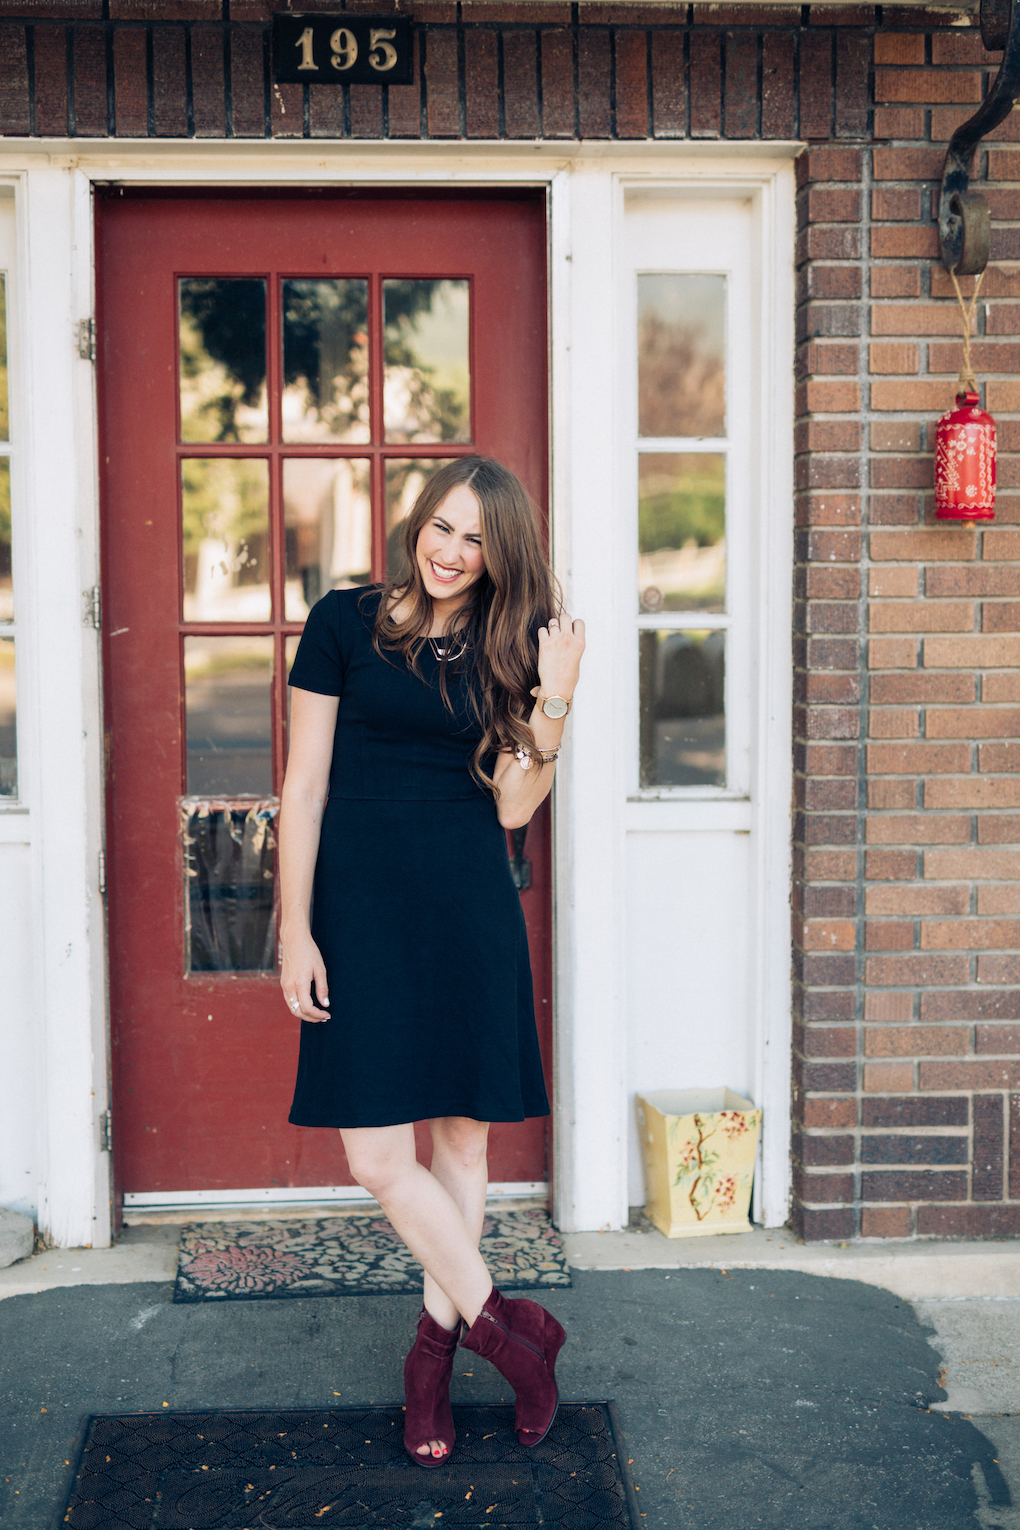 Girl with long brown hair wearing black madewell dress and maroon wedges laughing